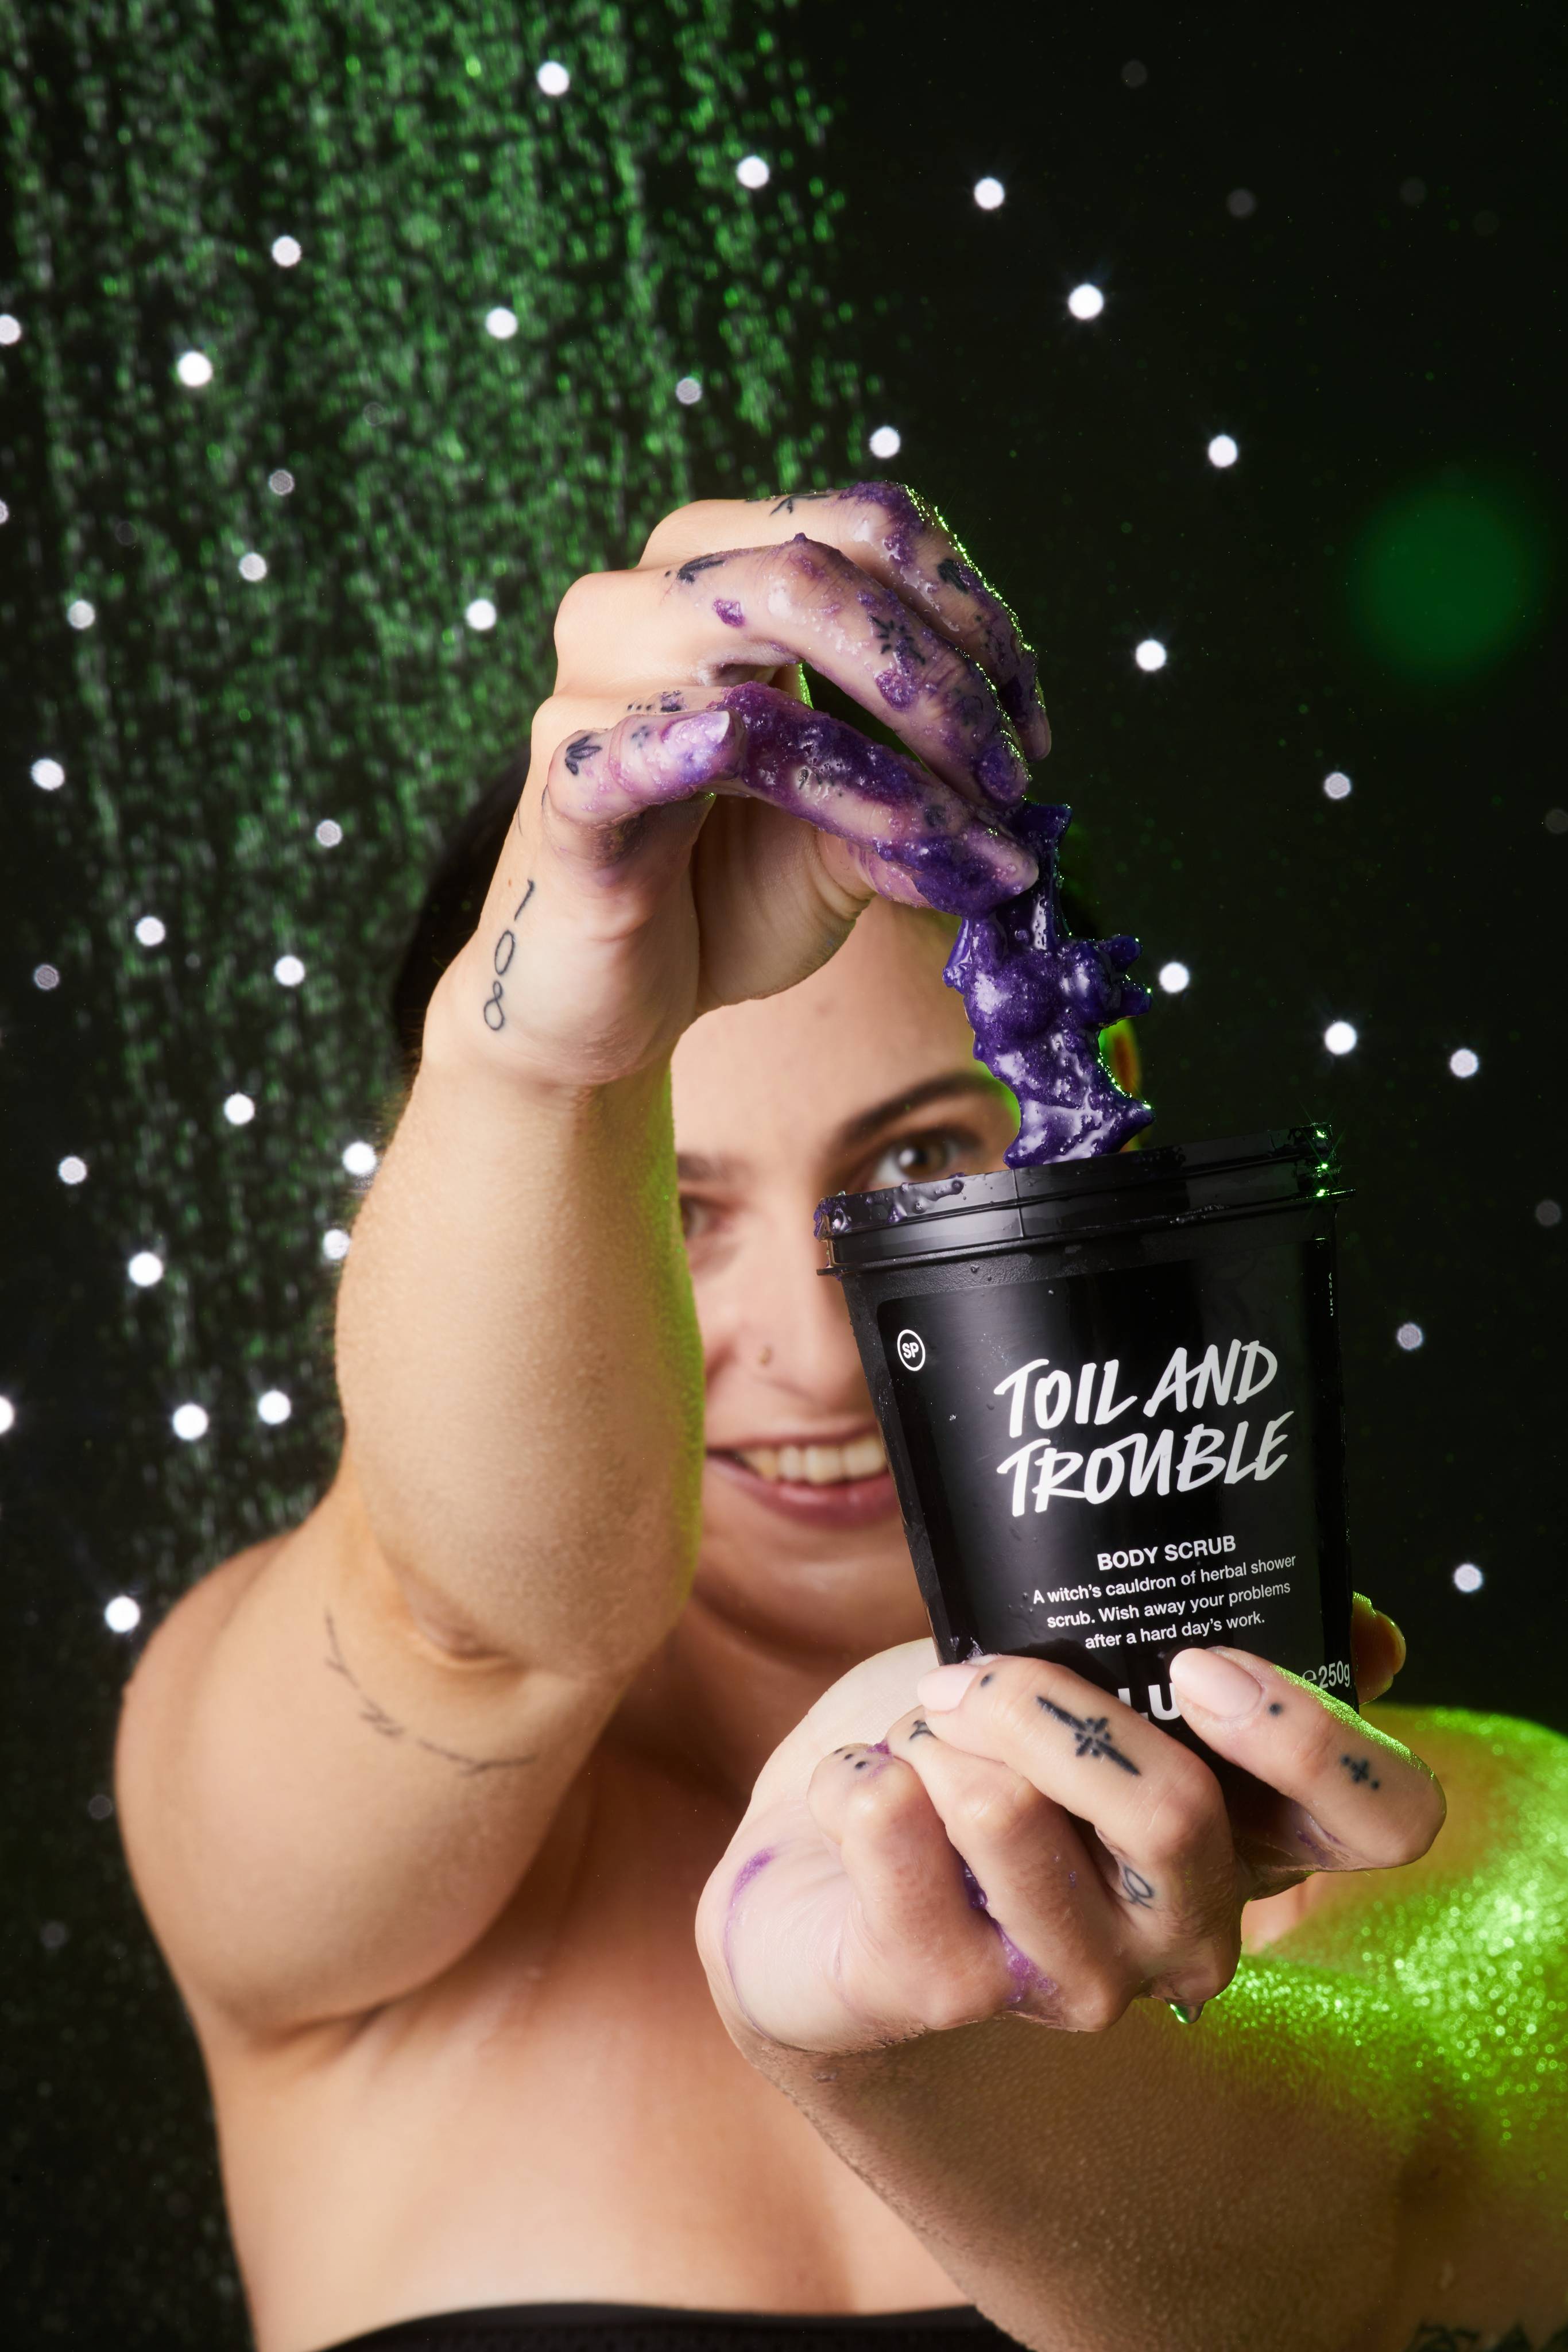 Model stands smiling, facing the camera with the focus on their hands in front holding the small purple jelly bat. 